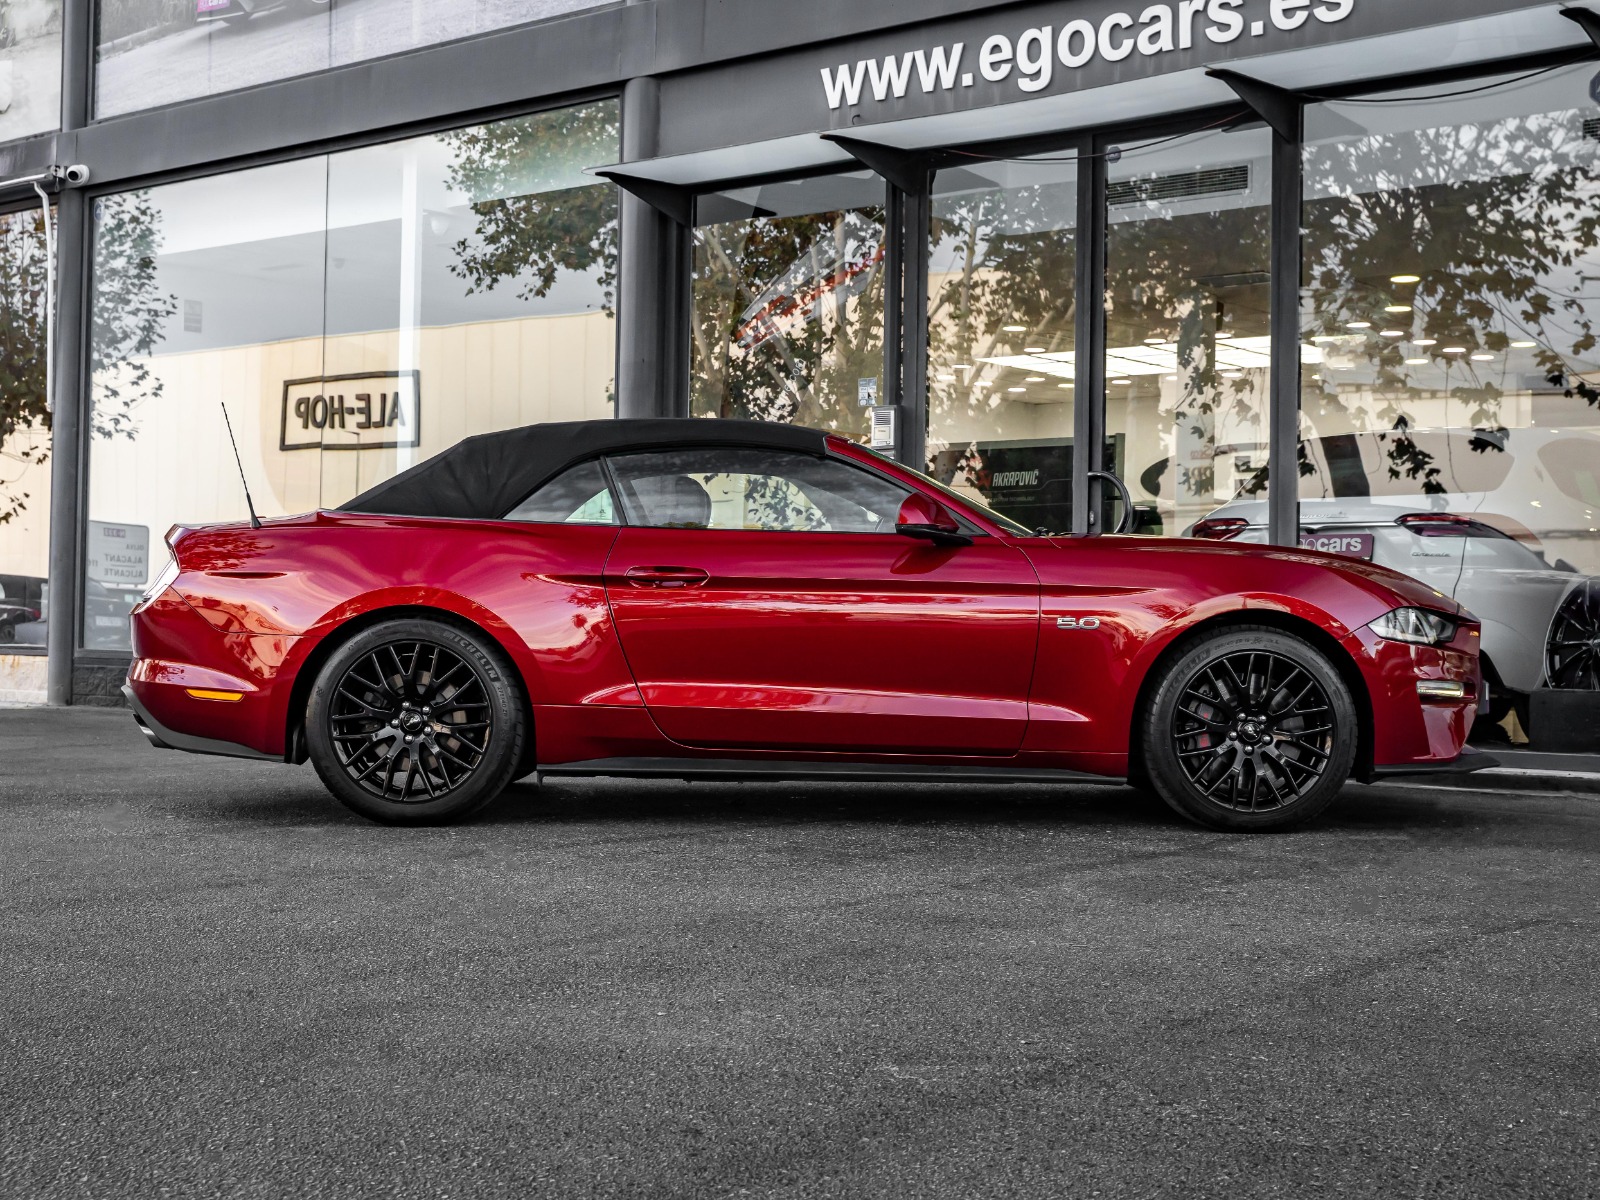 FORD MUSTANG GT CONVERTIBLE - EGOCARS (6)